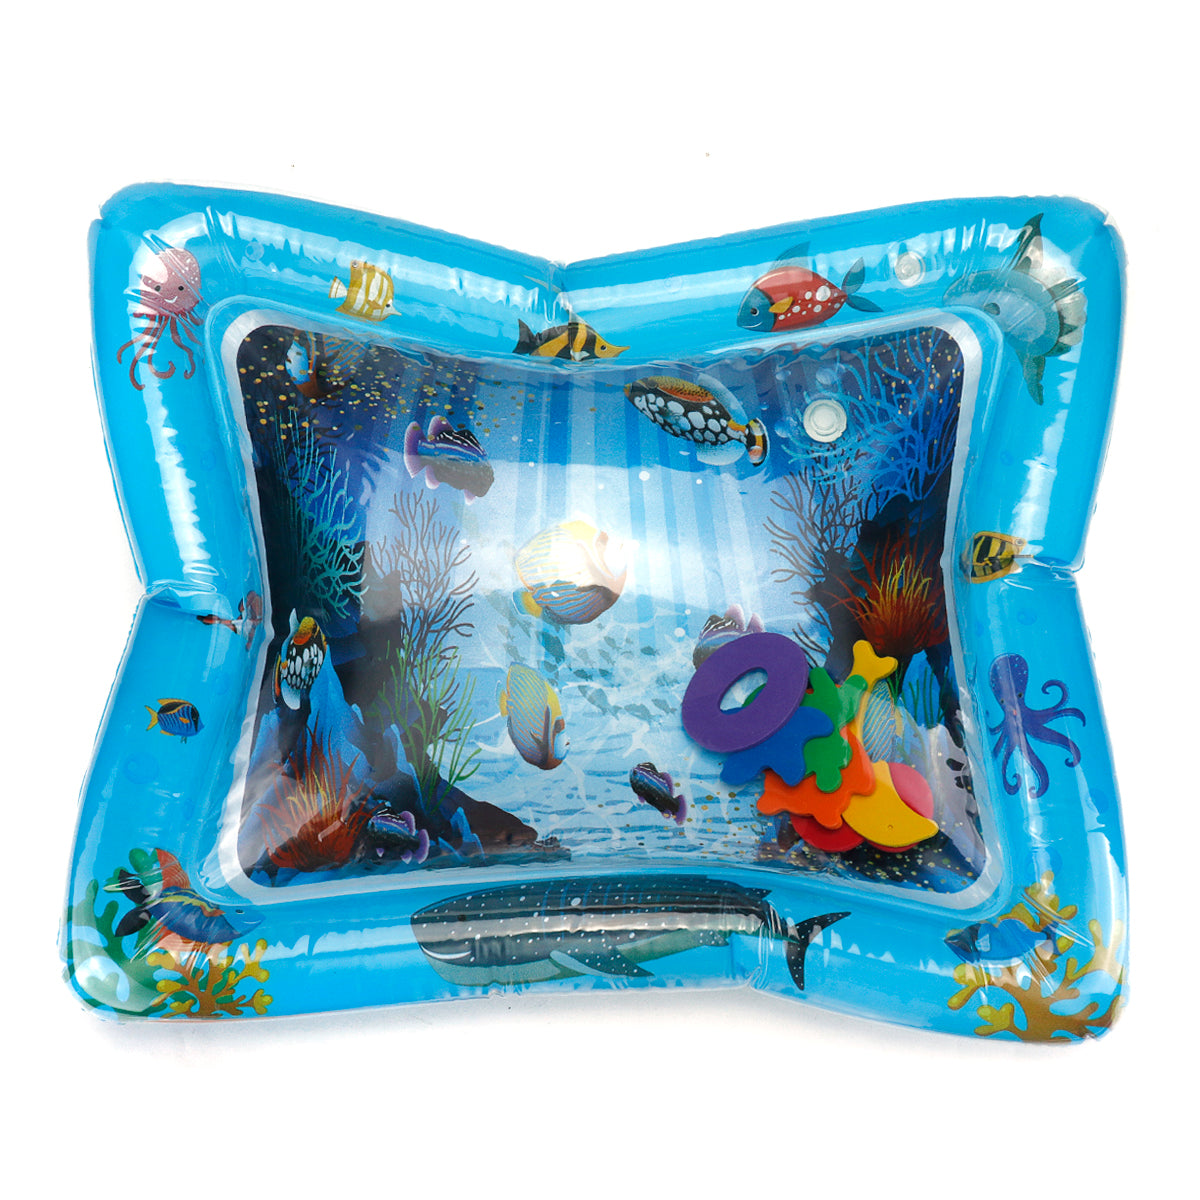 PVC Air Inflatable Swimming Air Mattress Water Cushion Baby Kids Infant Toddlers Tummy Water Play Fun Toys Ice Mat Pad